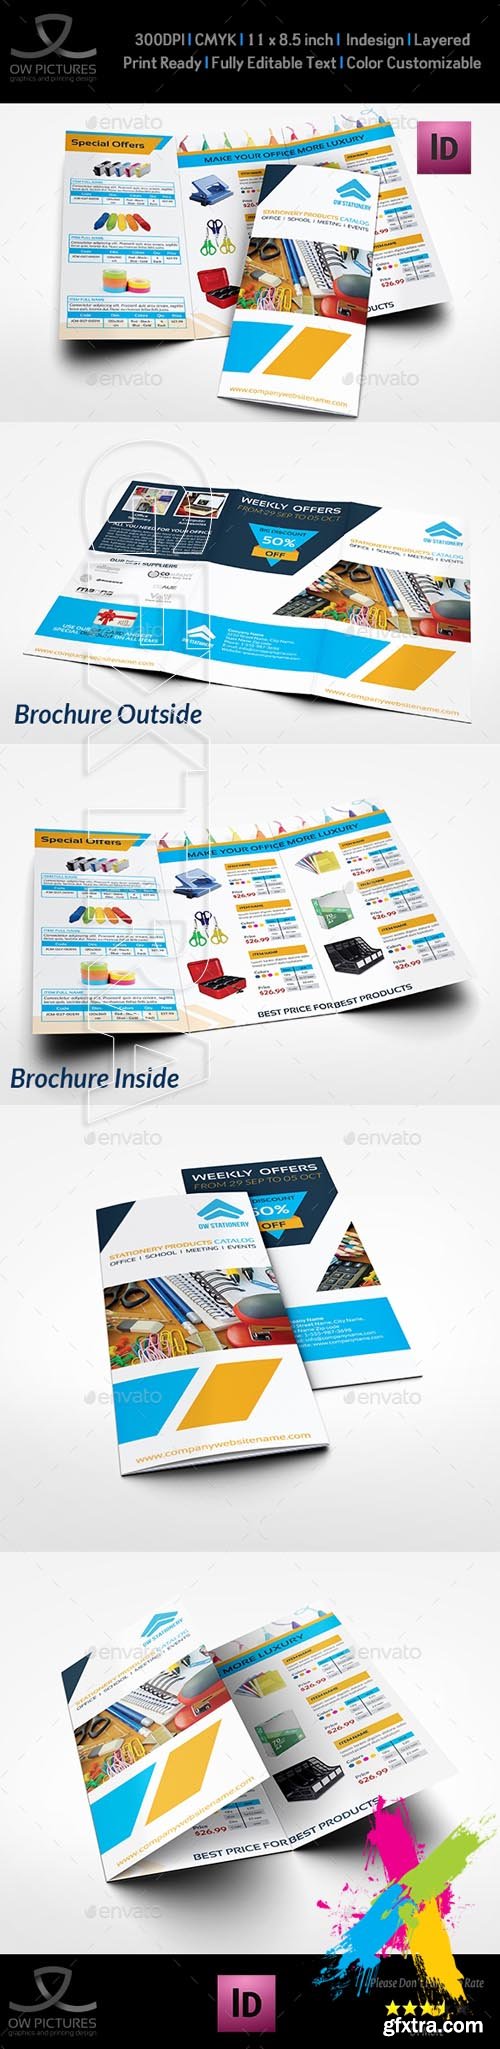 GR - Stationery Products Catalog Tri- Fold Brochure Template 20043063